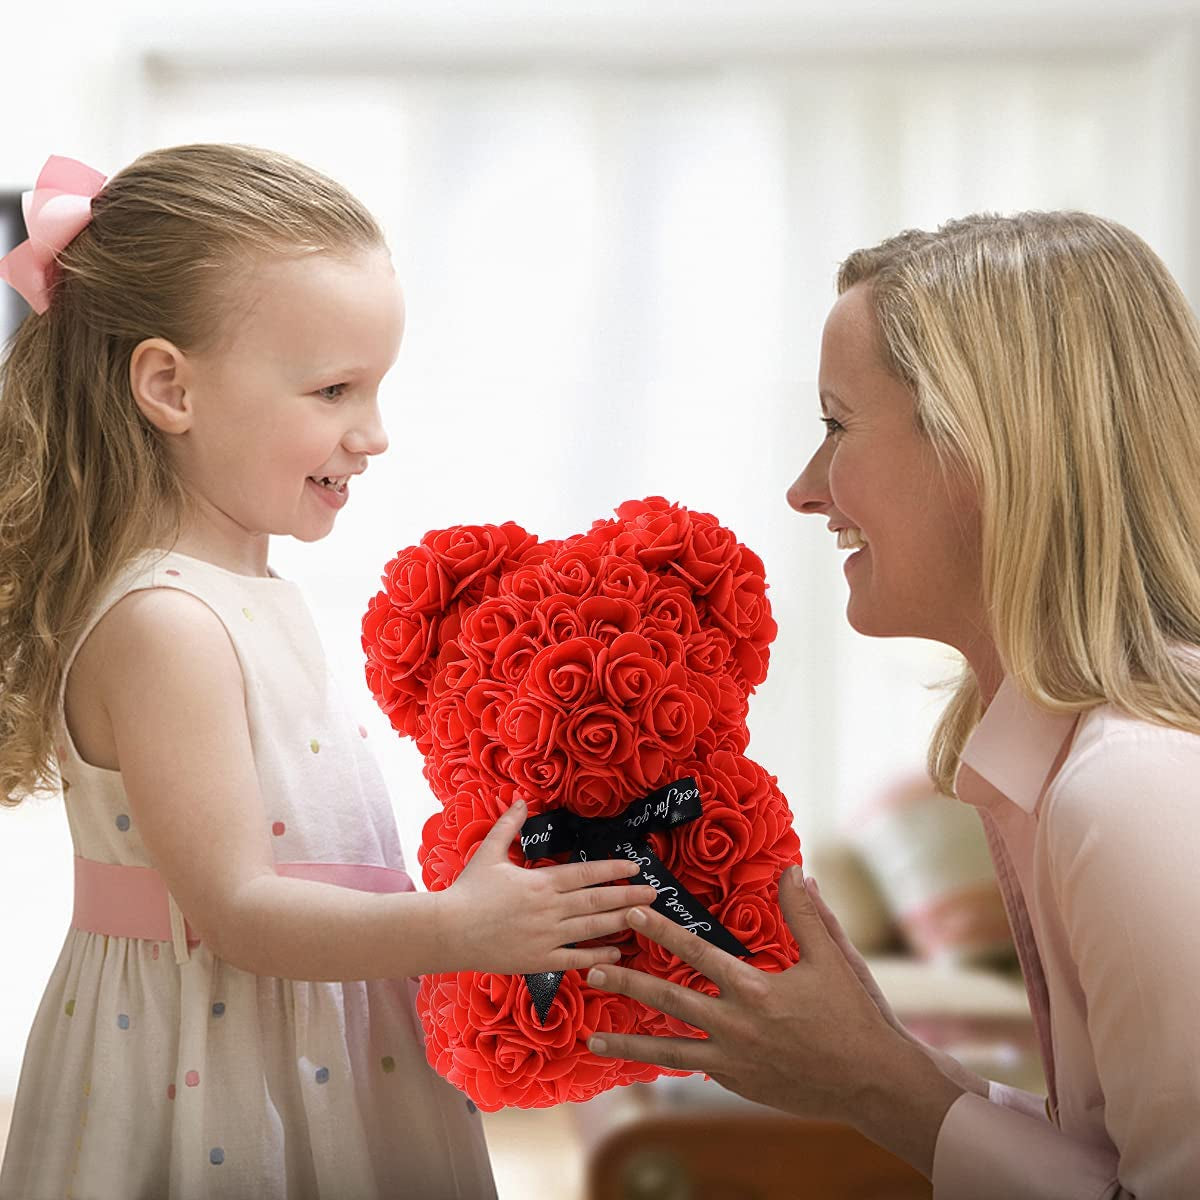 "Rose Flower Bear - A Dazzling Handmade Gift for Women - Perfect for Mother's Day, Valentine's Day, Anniversaries, and Bridal Showers - Comes with Clear Gift Box and Greeting Card - Red"